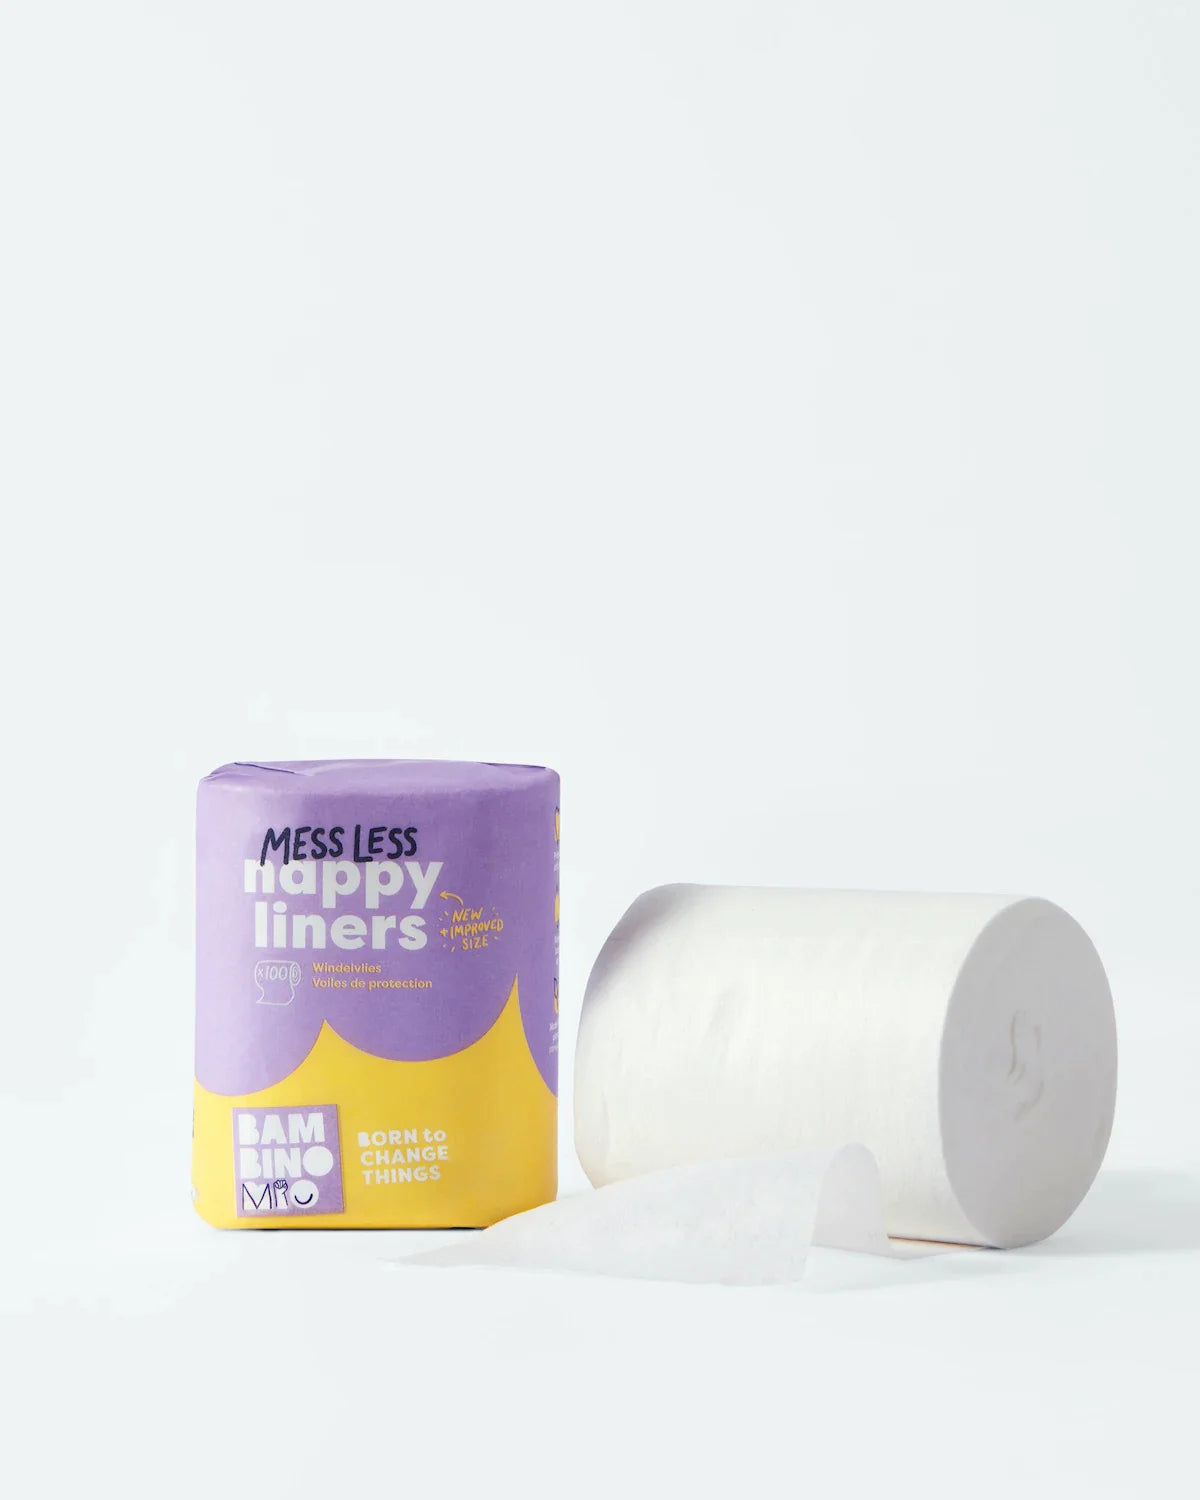 Messless nappy liners - Bambino Mio (UK & IE)